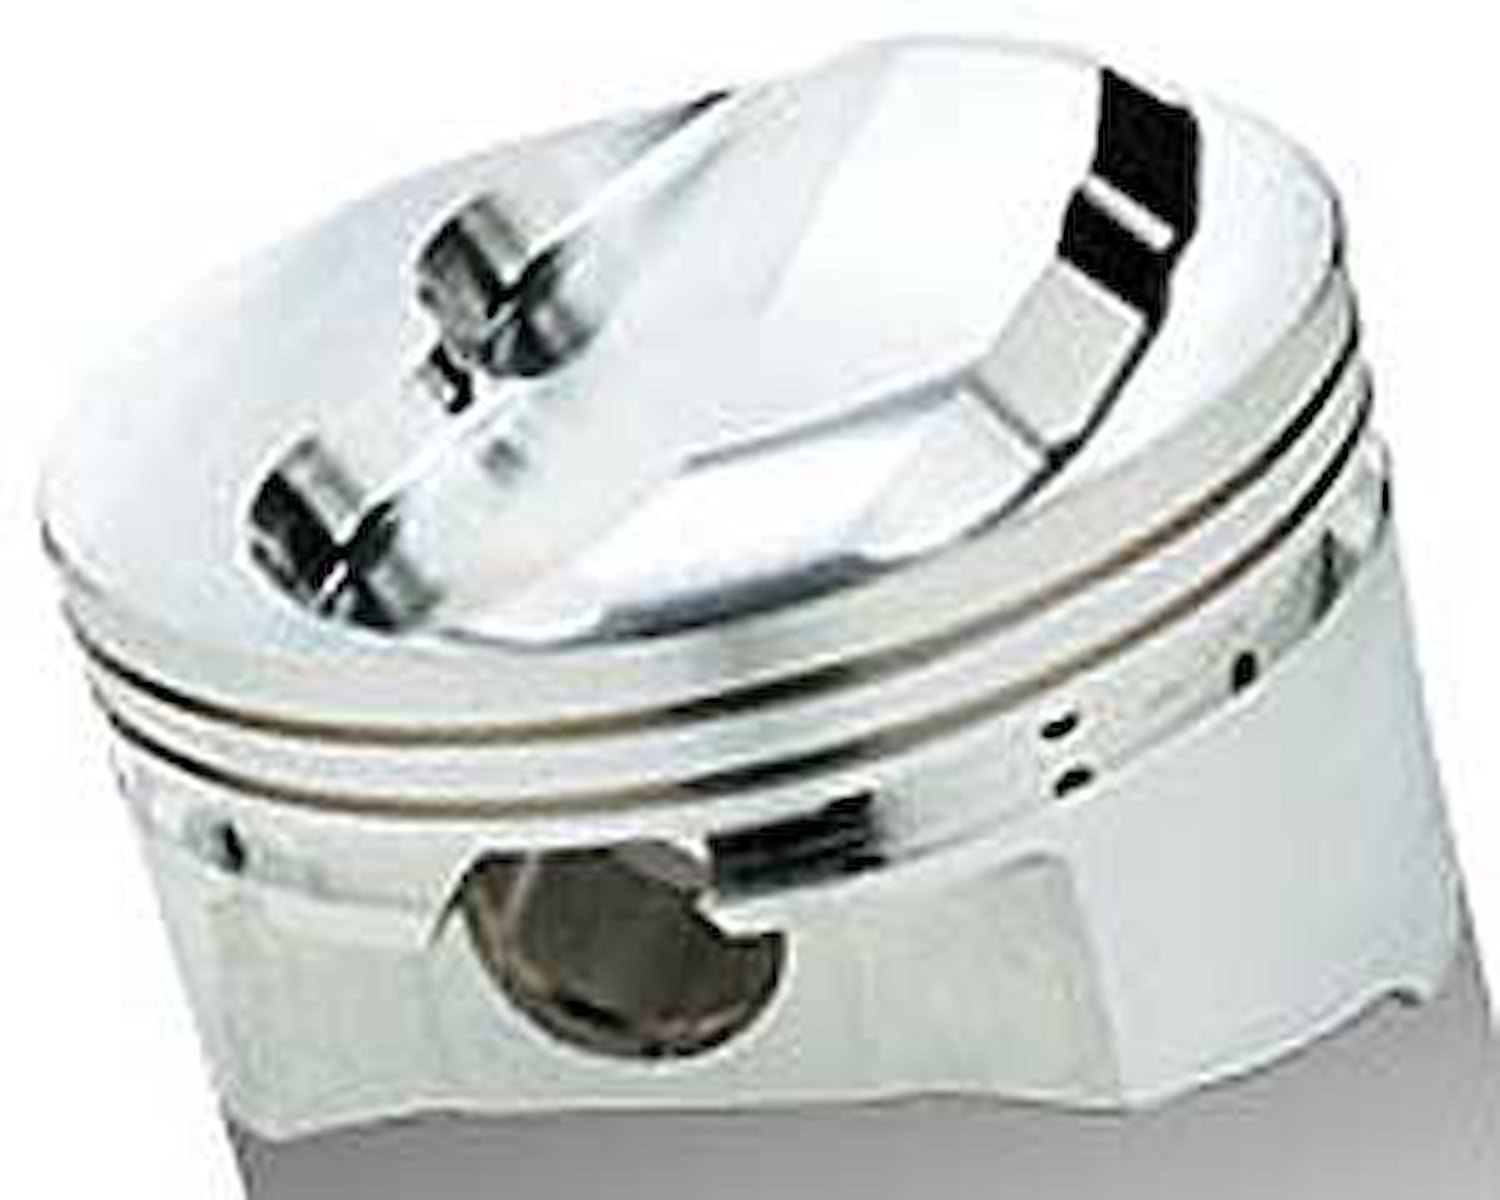 SRP Dome Pistons for Small Block Chevy Bore 4.060"